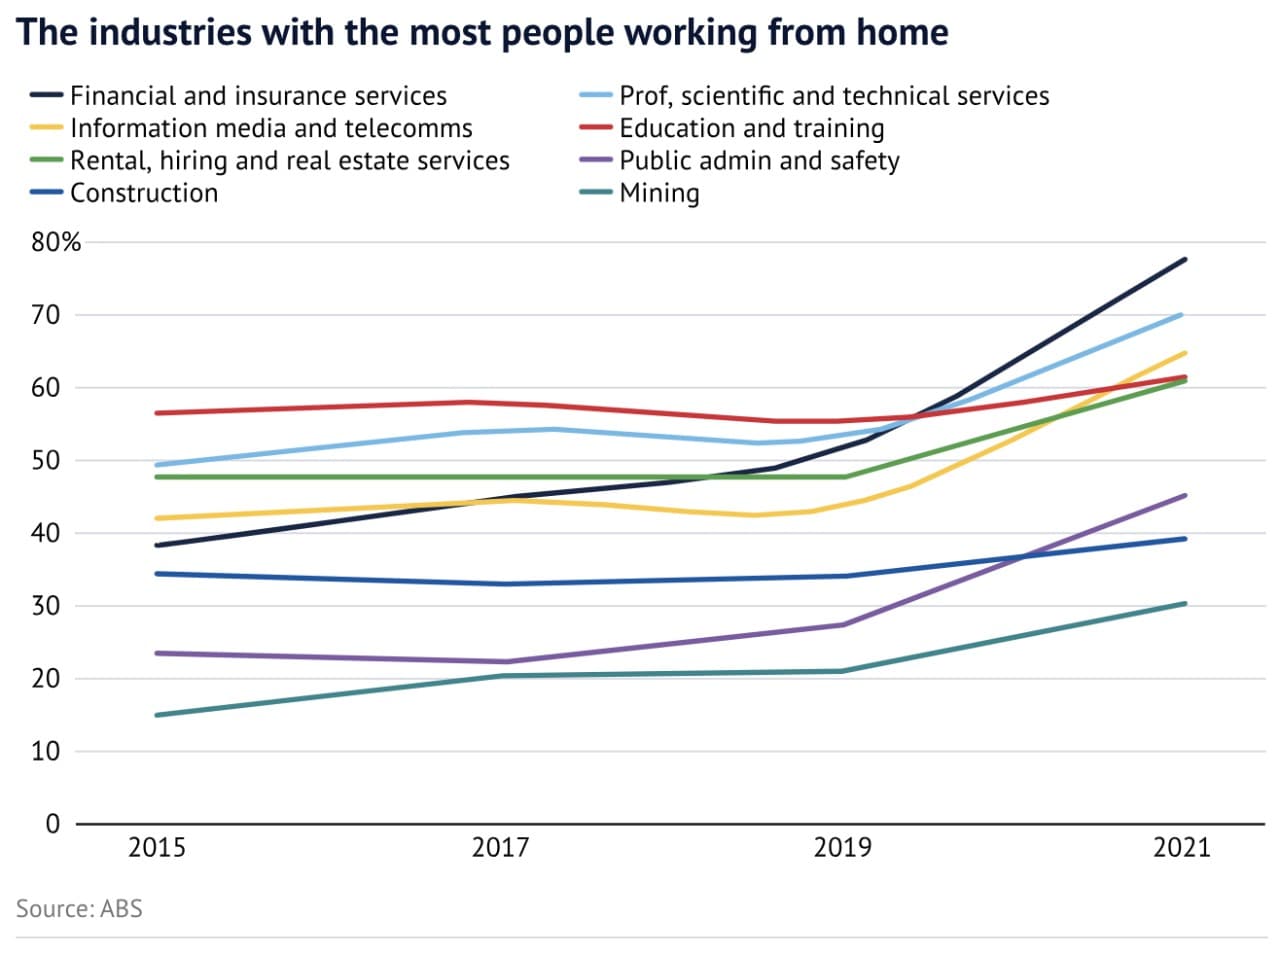 Graph showing the industries where the most people work from home